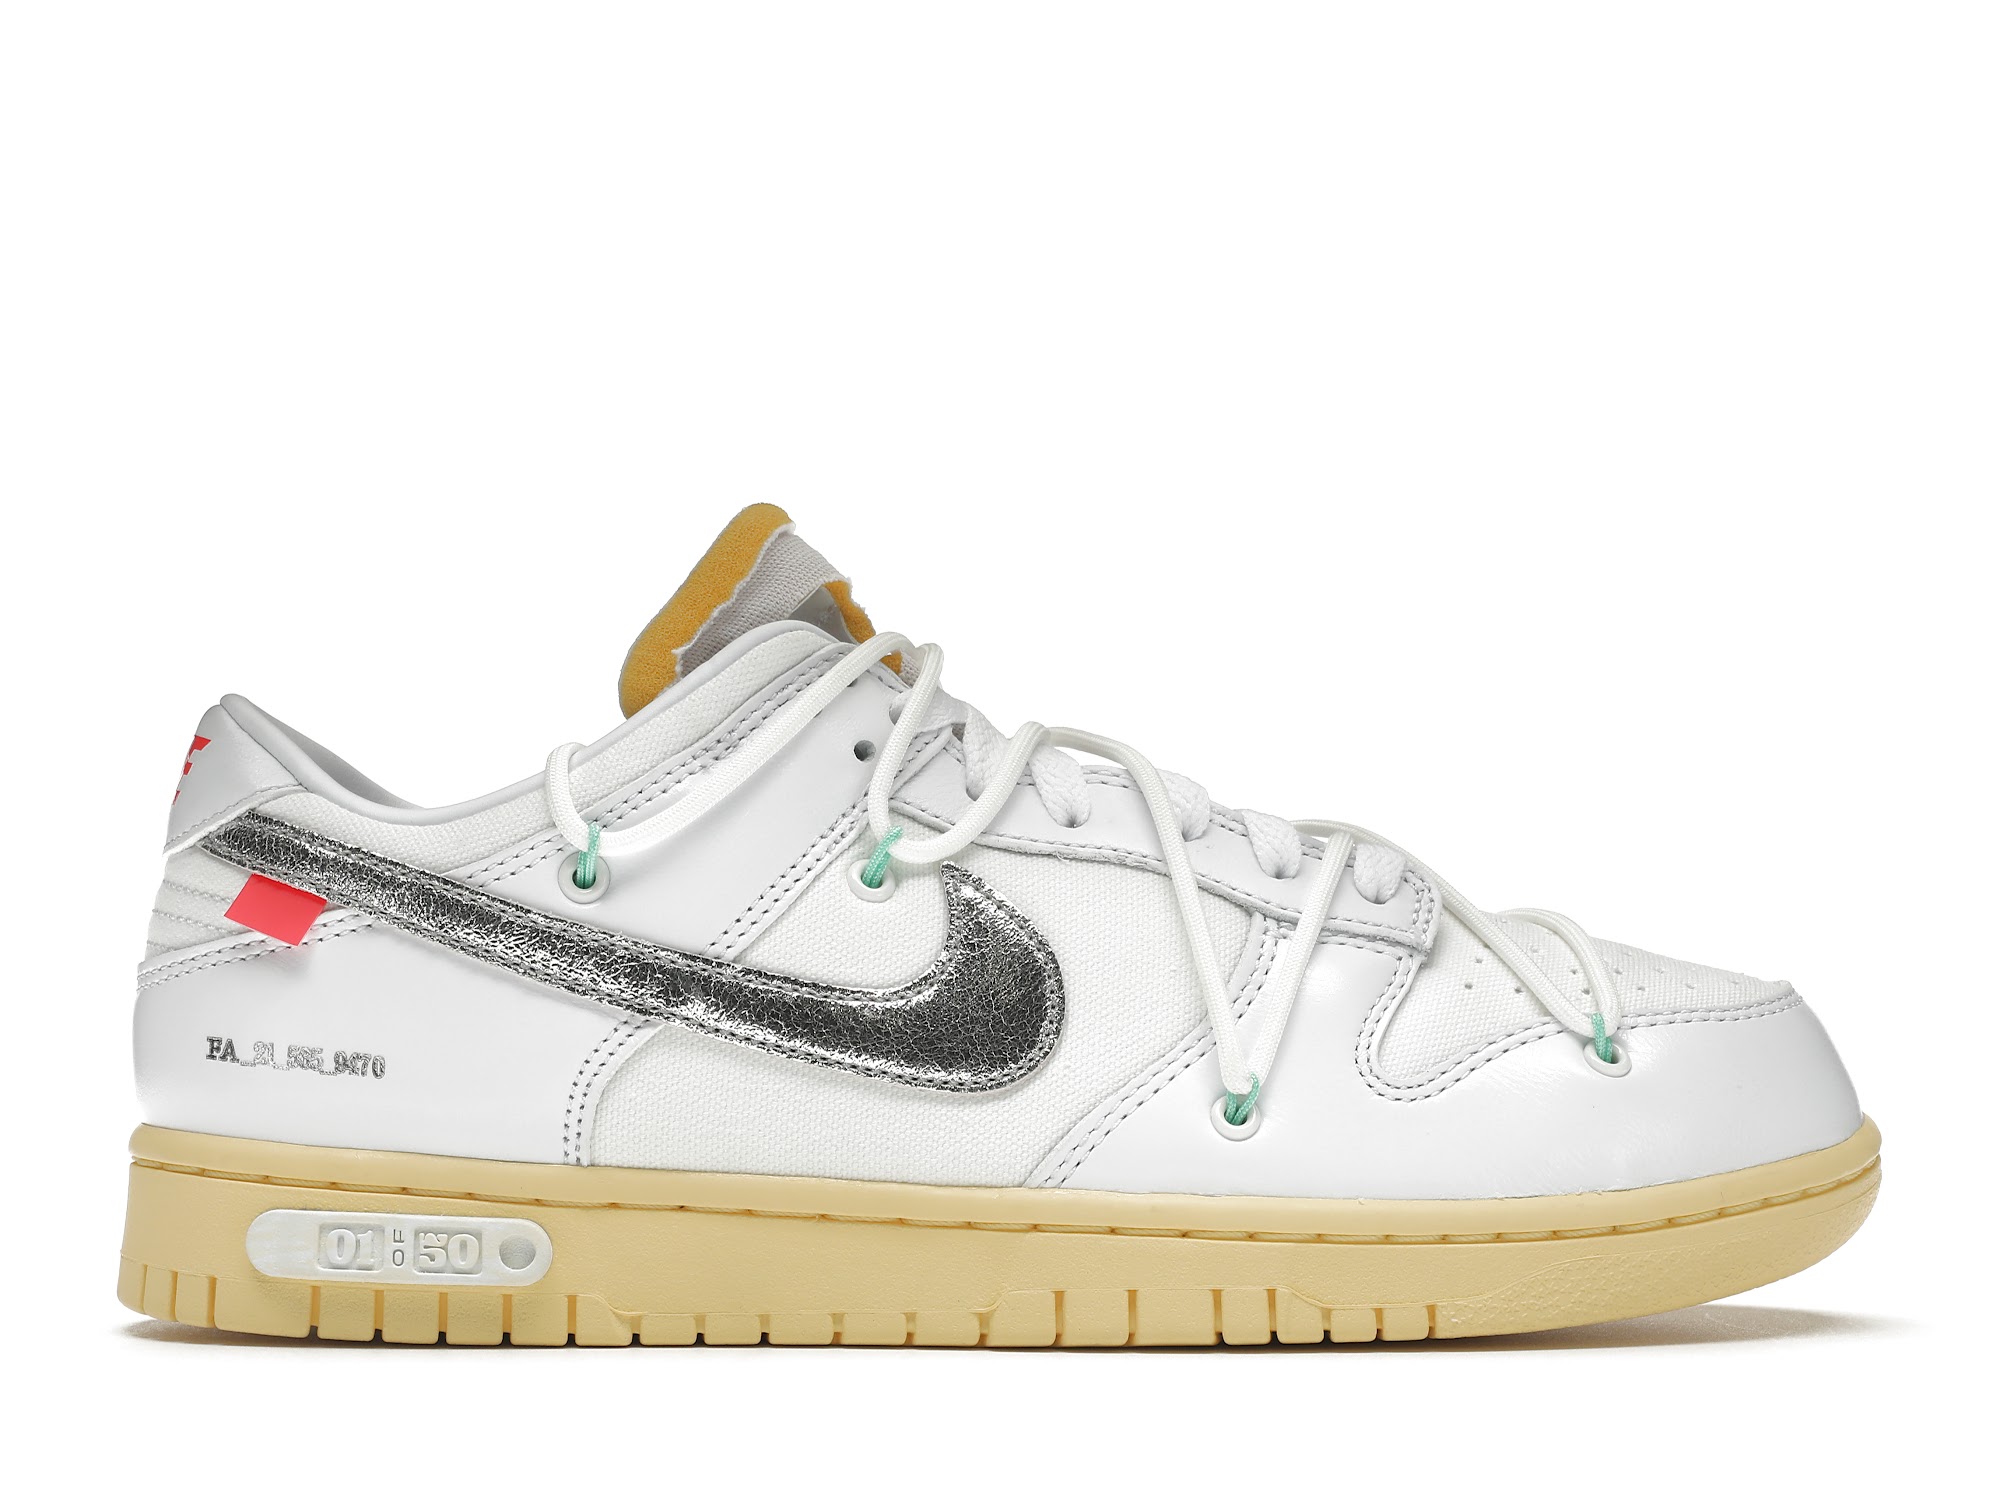 OFF-WHITE × NIKE DUNK LOW 1 OF 50